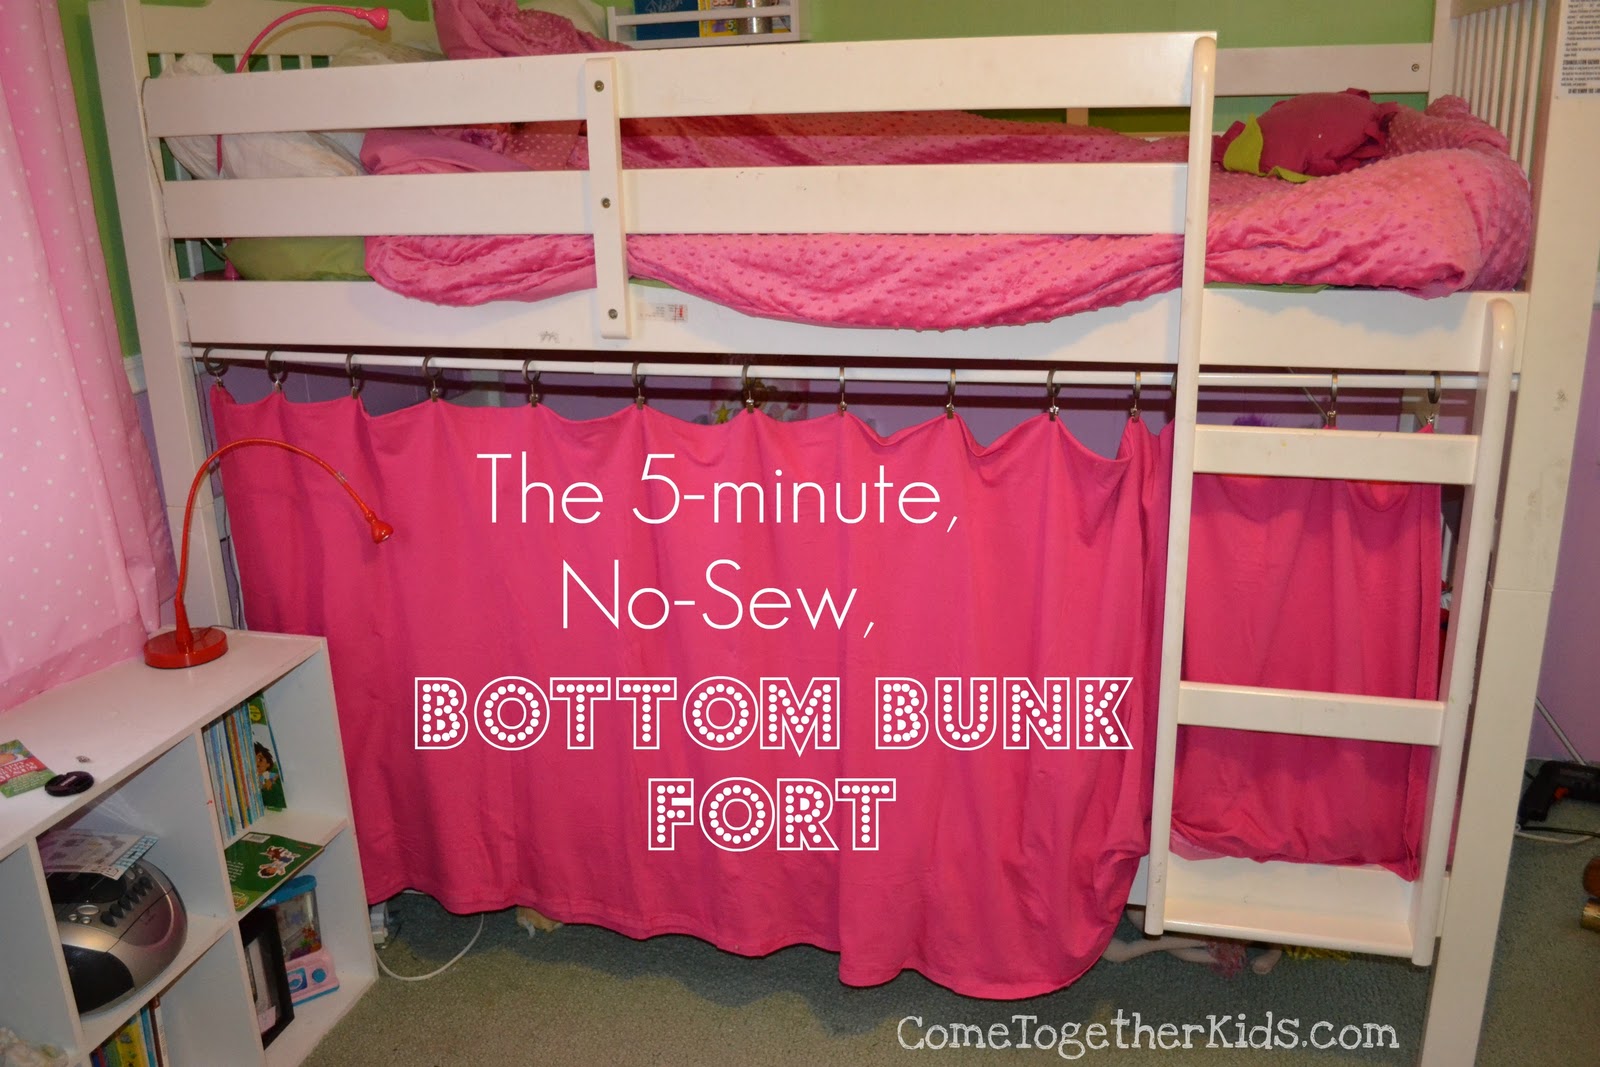 Come Together Kids: The 5-Minute, No-Sew Bottom Bunk Fort